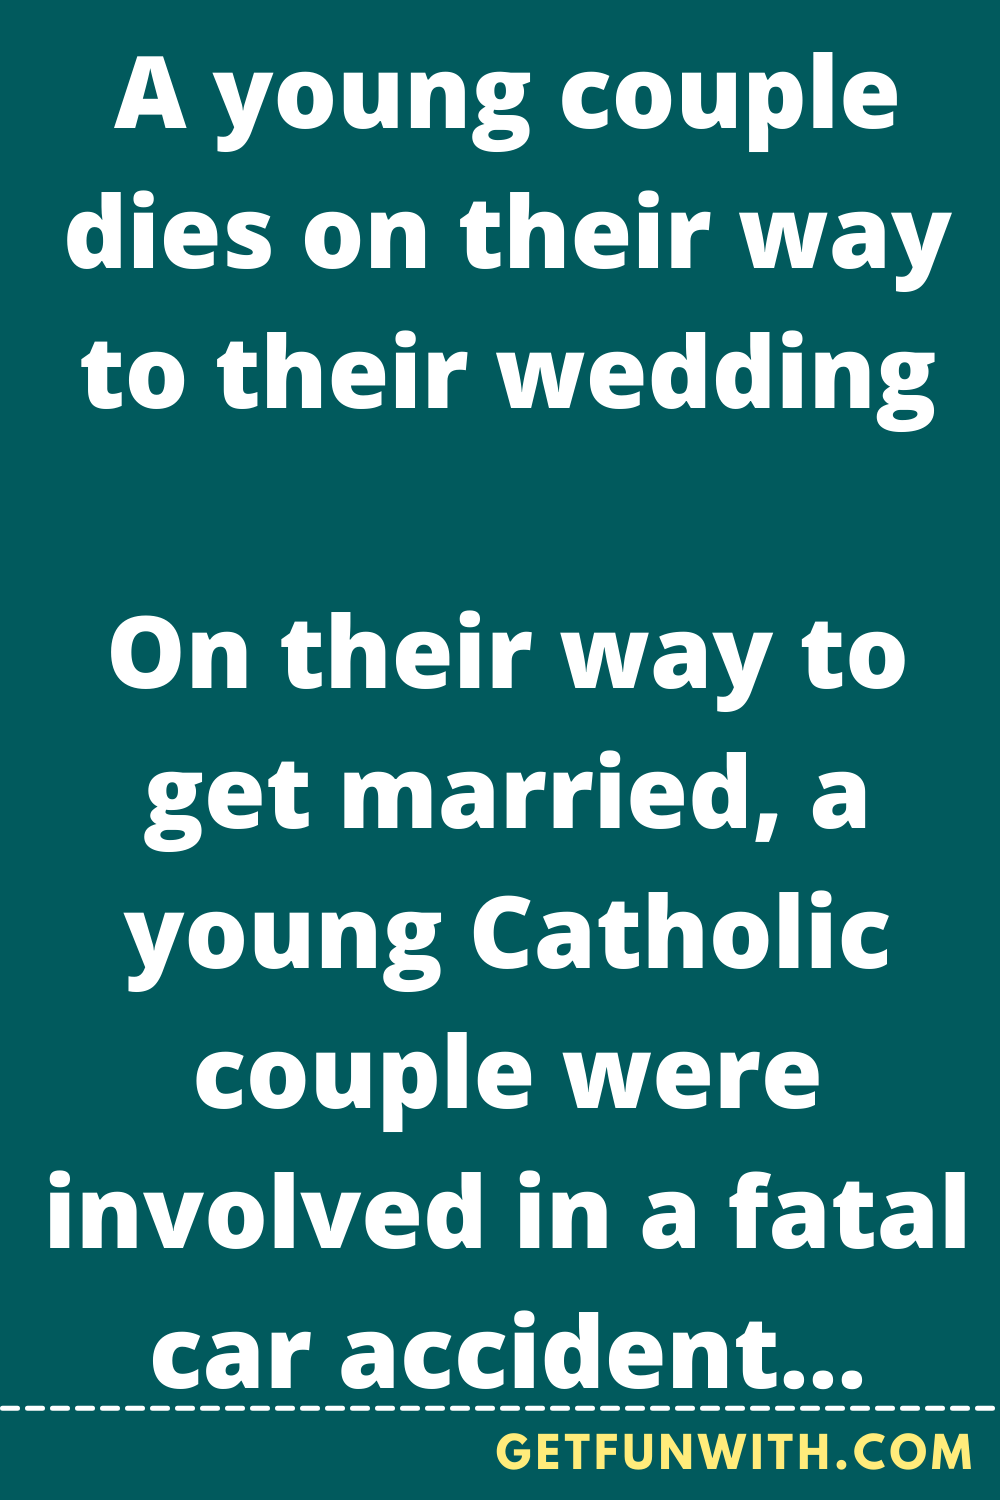 A young couple dies on their way to their wedding